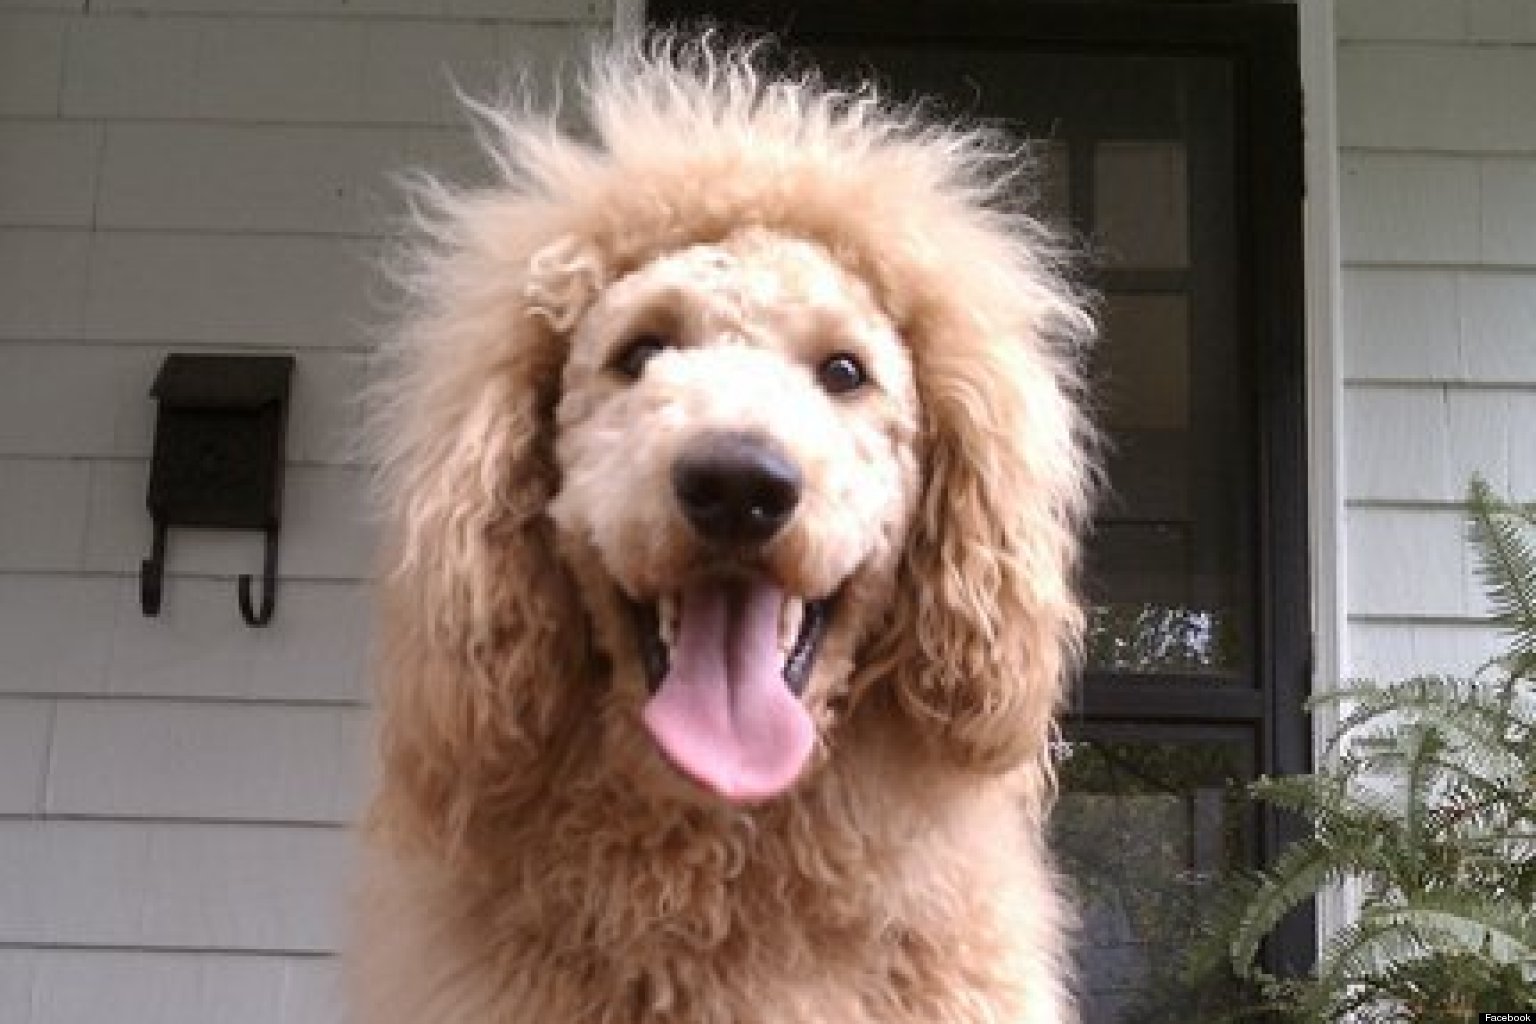 Charles The Monarch, Dog, Mistaken For Lion In 911 Call (PHOTOS)